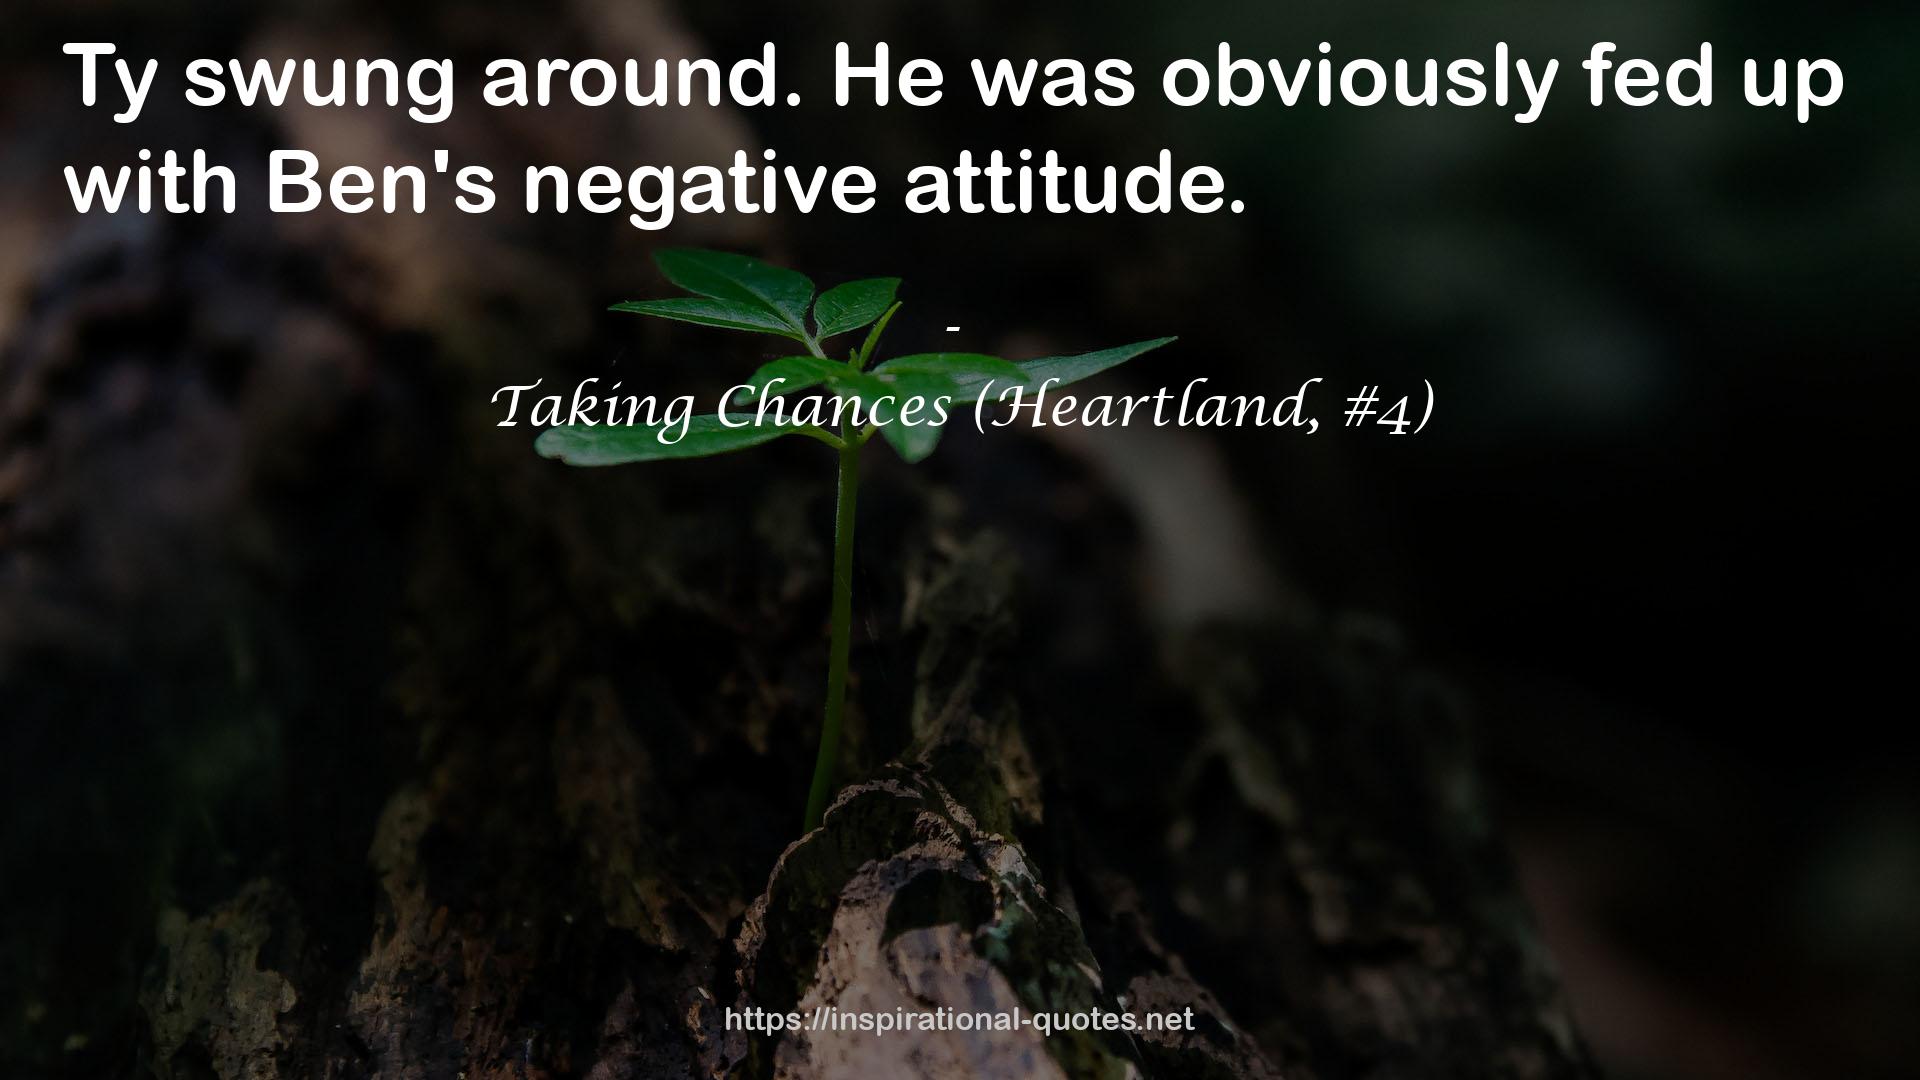 Taking Chances (Heartland, #4) QUOTES